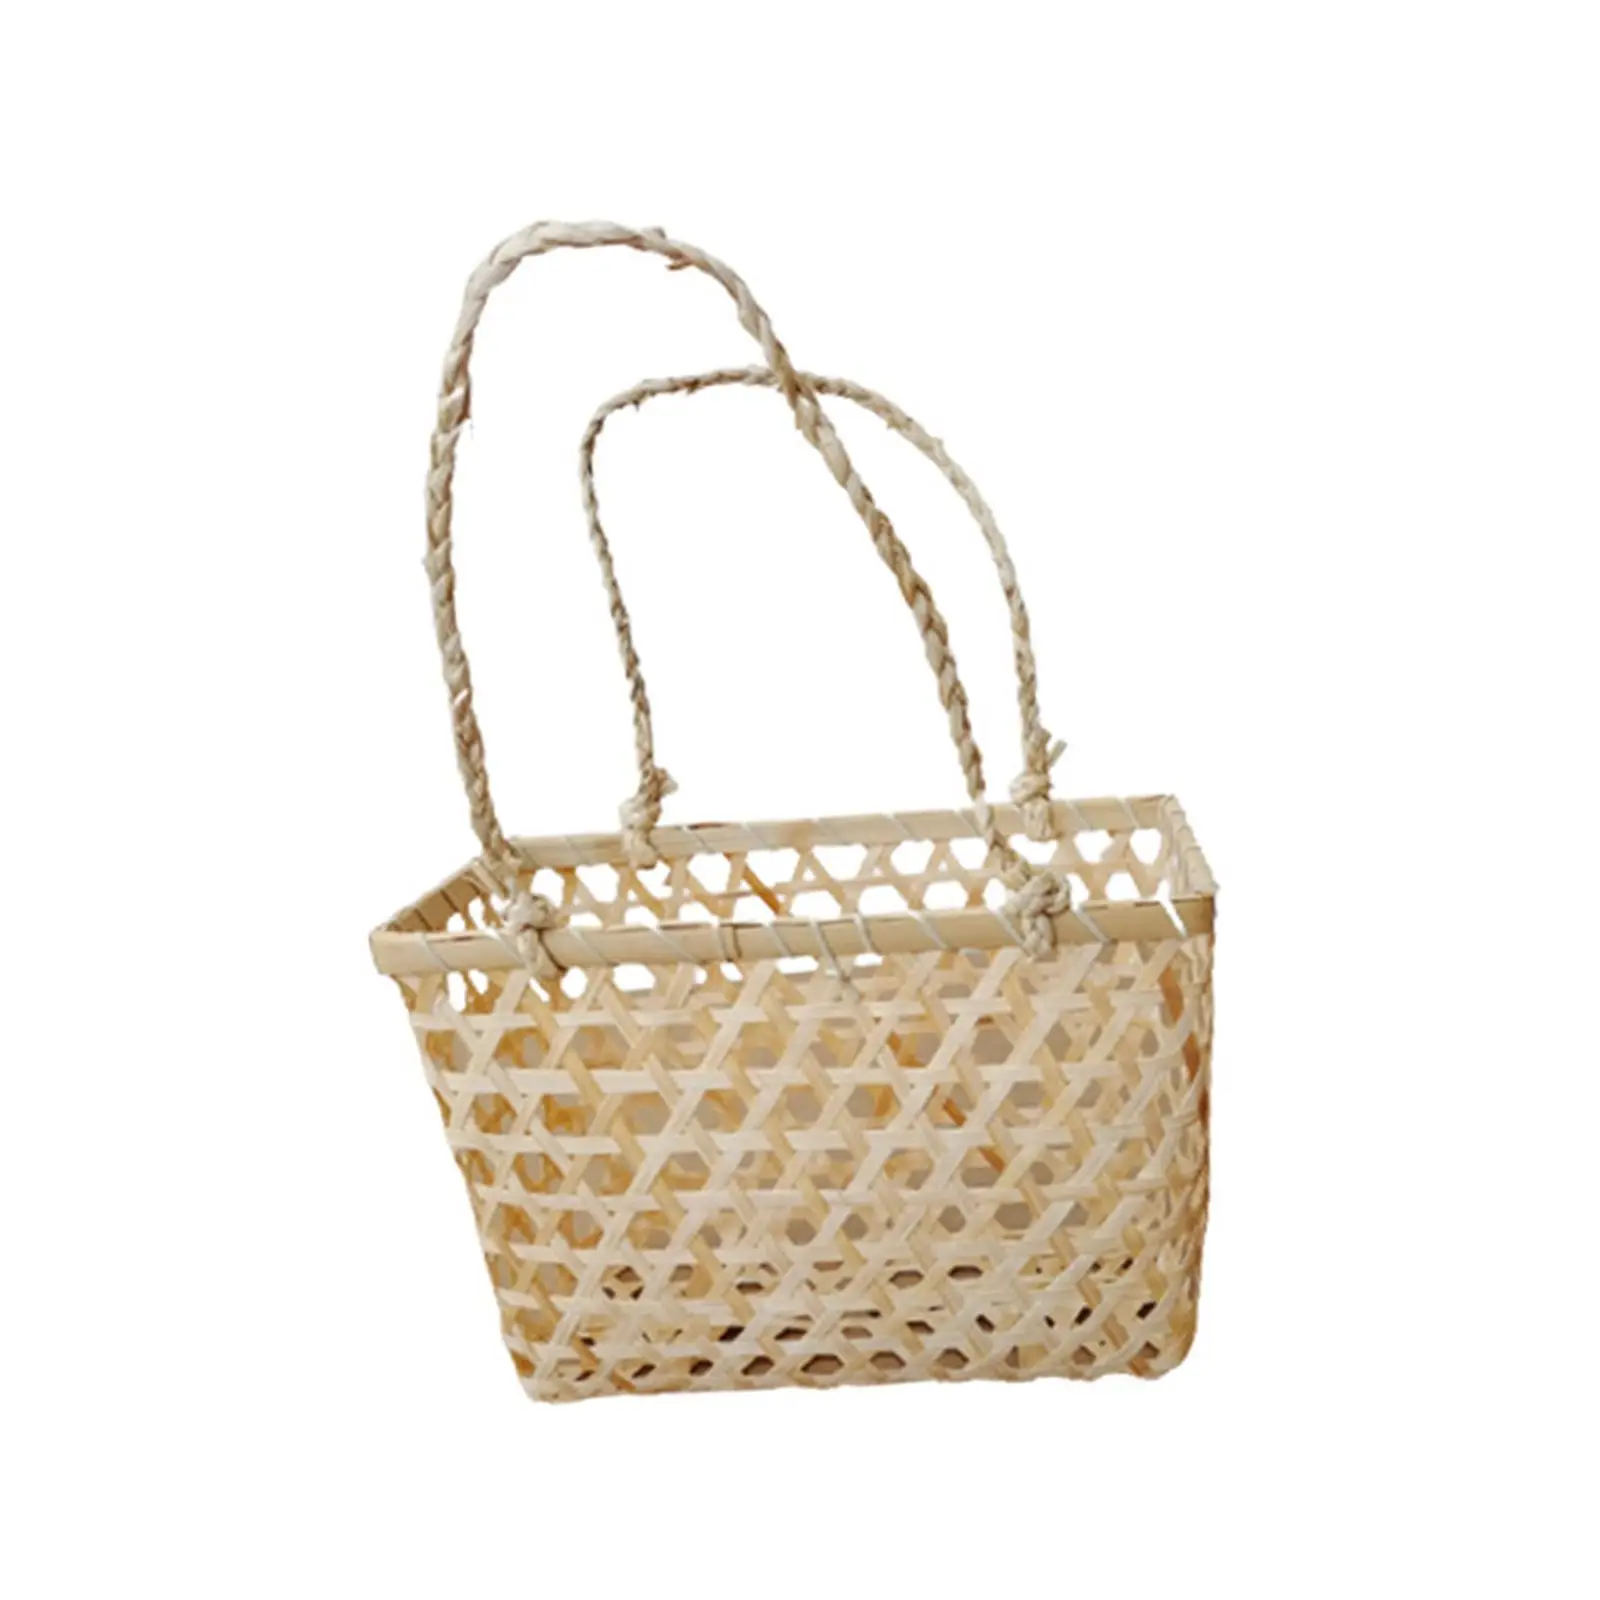 Basket, Small Picnic Basket, Portable Rattan Basket, Food Storage Container for